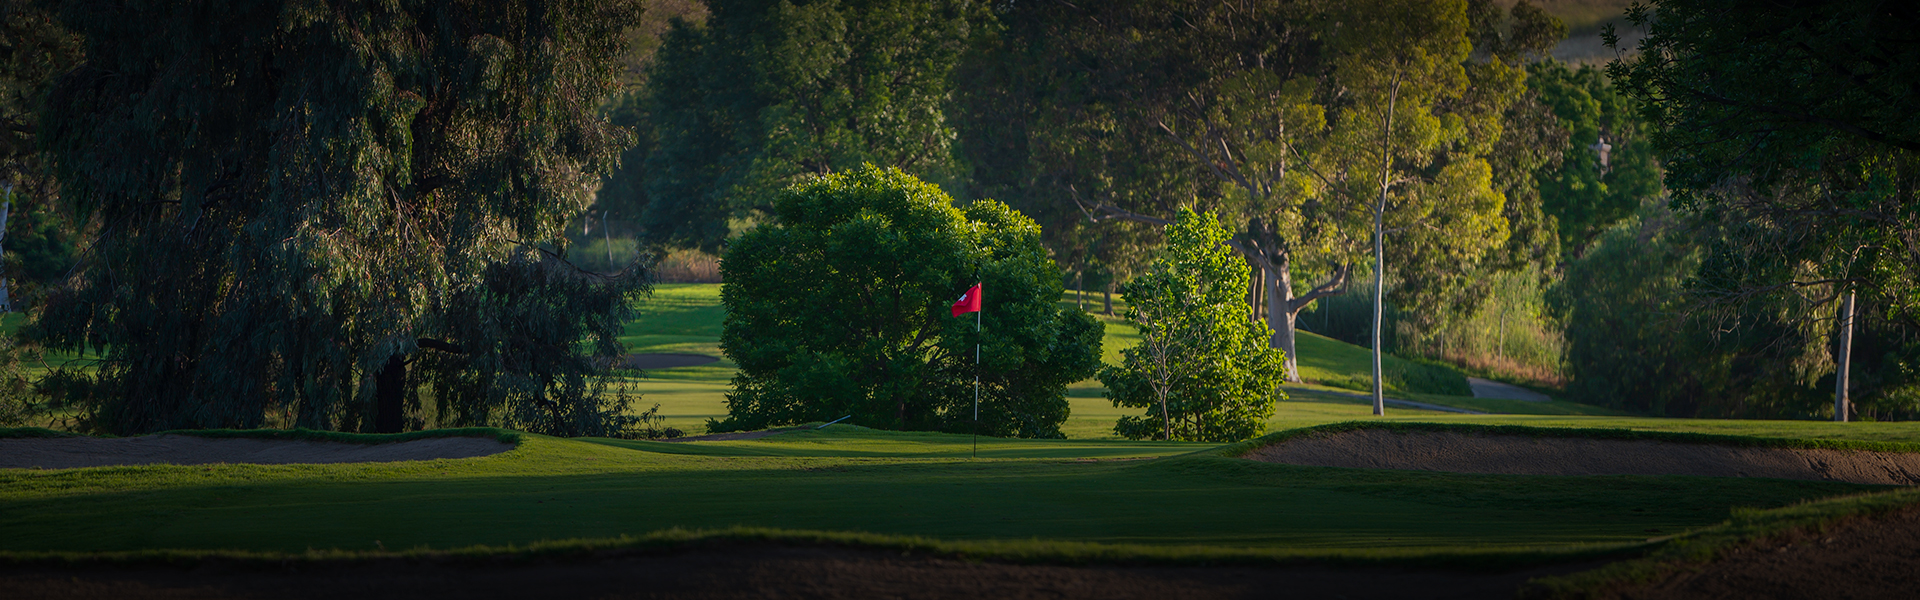 a dim image of a red flagstick and a variety of trees on the golf course